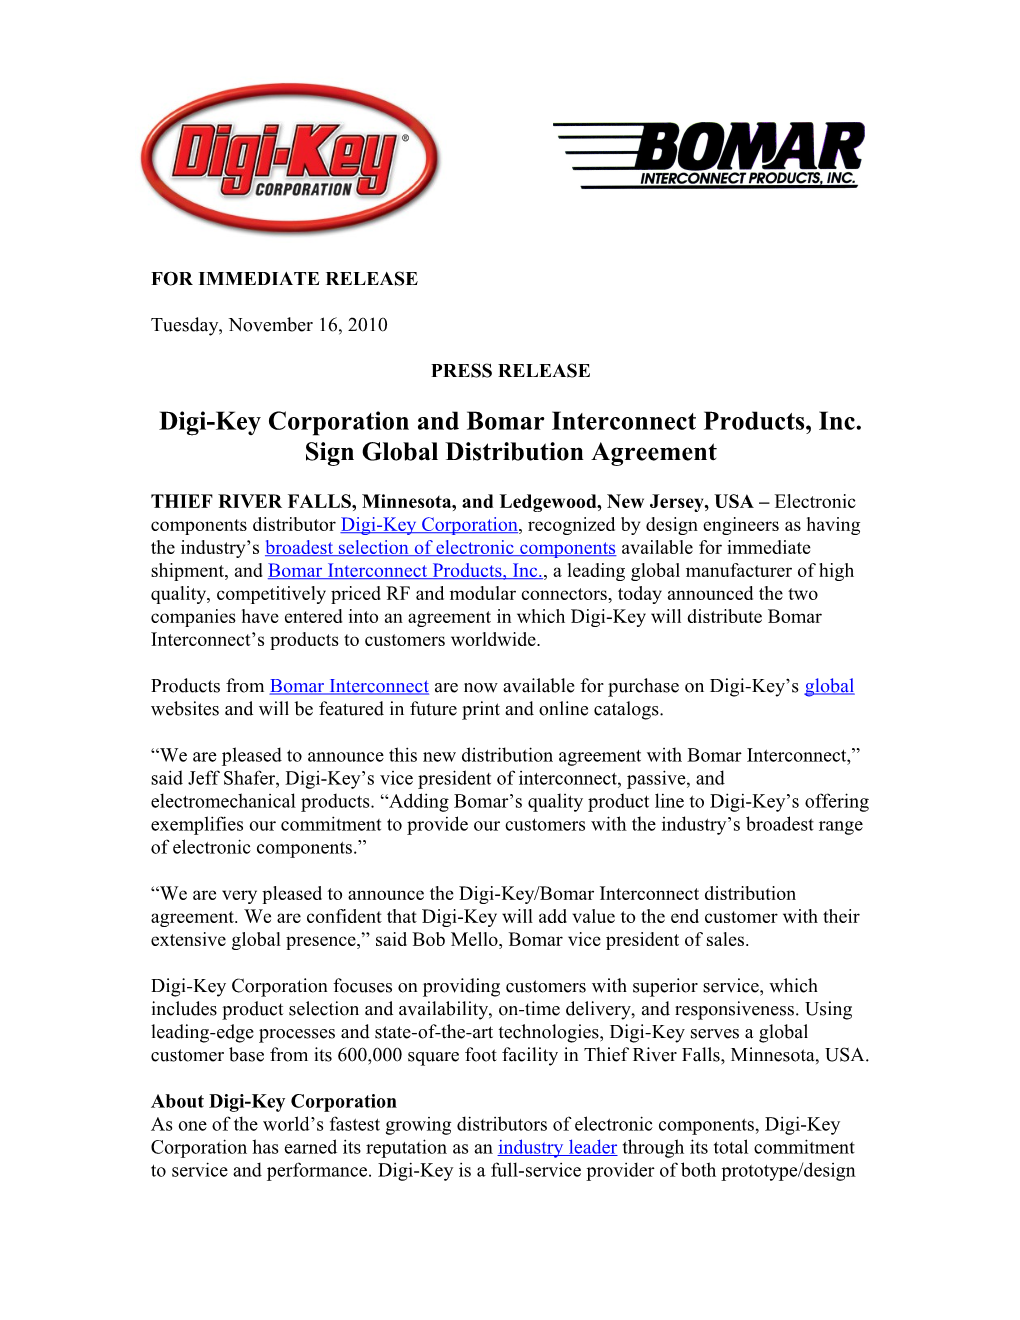 Digi-Key Corporation and Bomar Interconnect Products, Inc